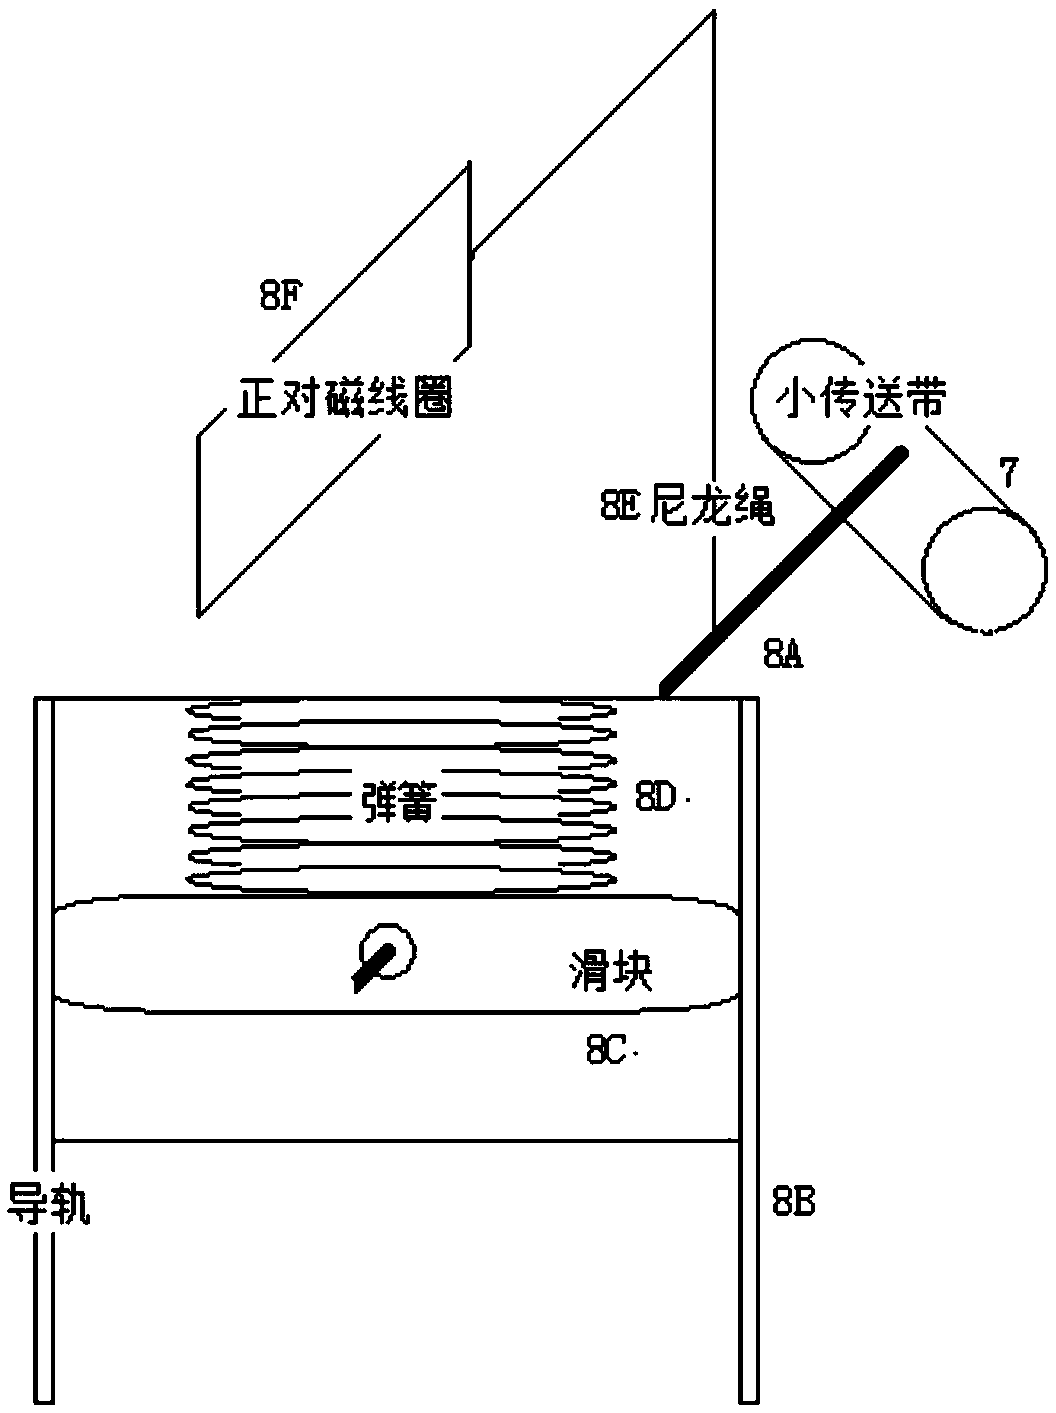 Banknote-receiving device based on voltage-controlled rotating speed